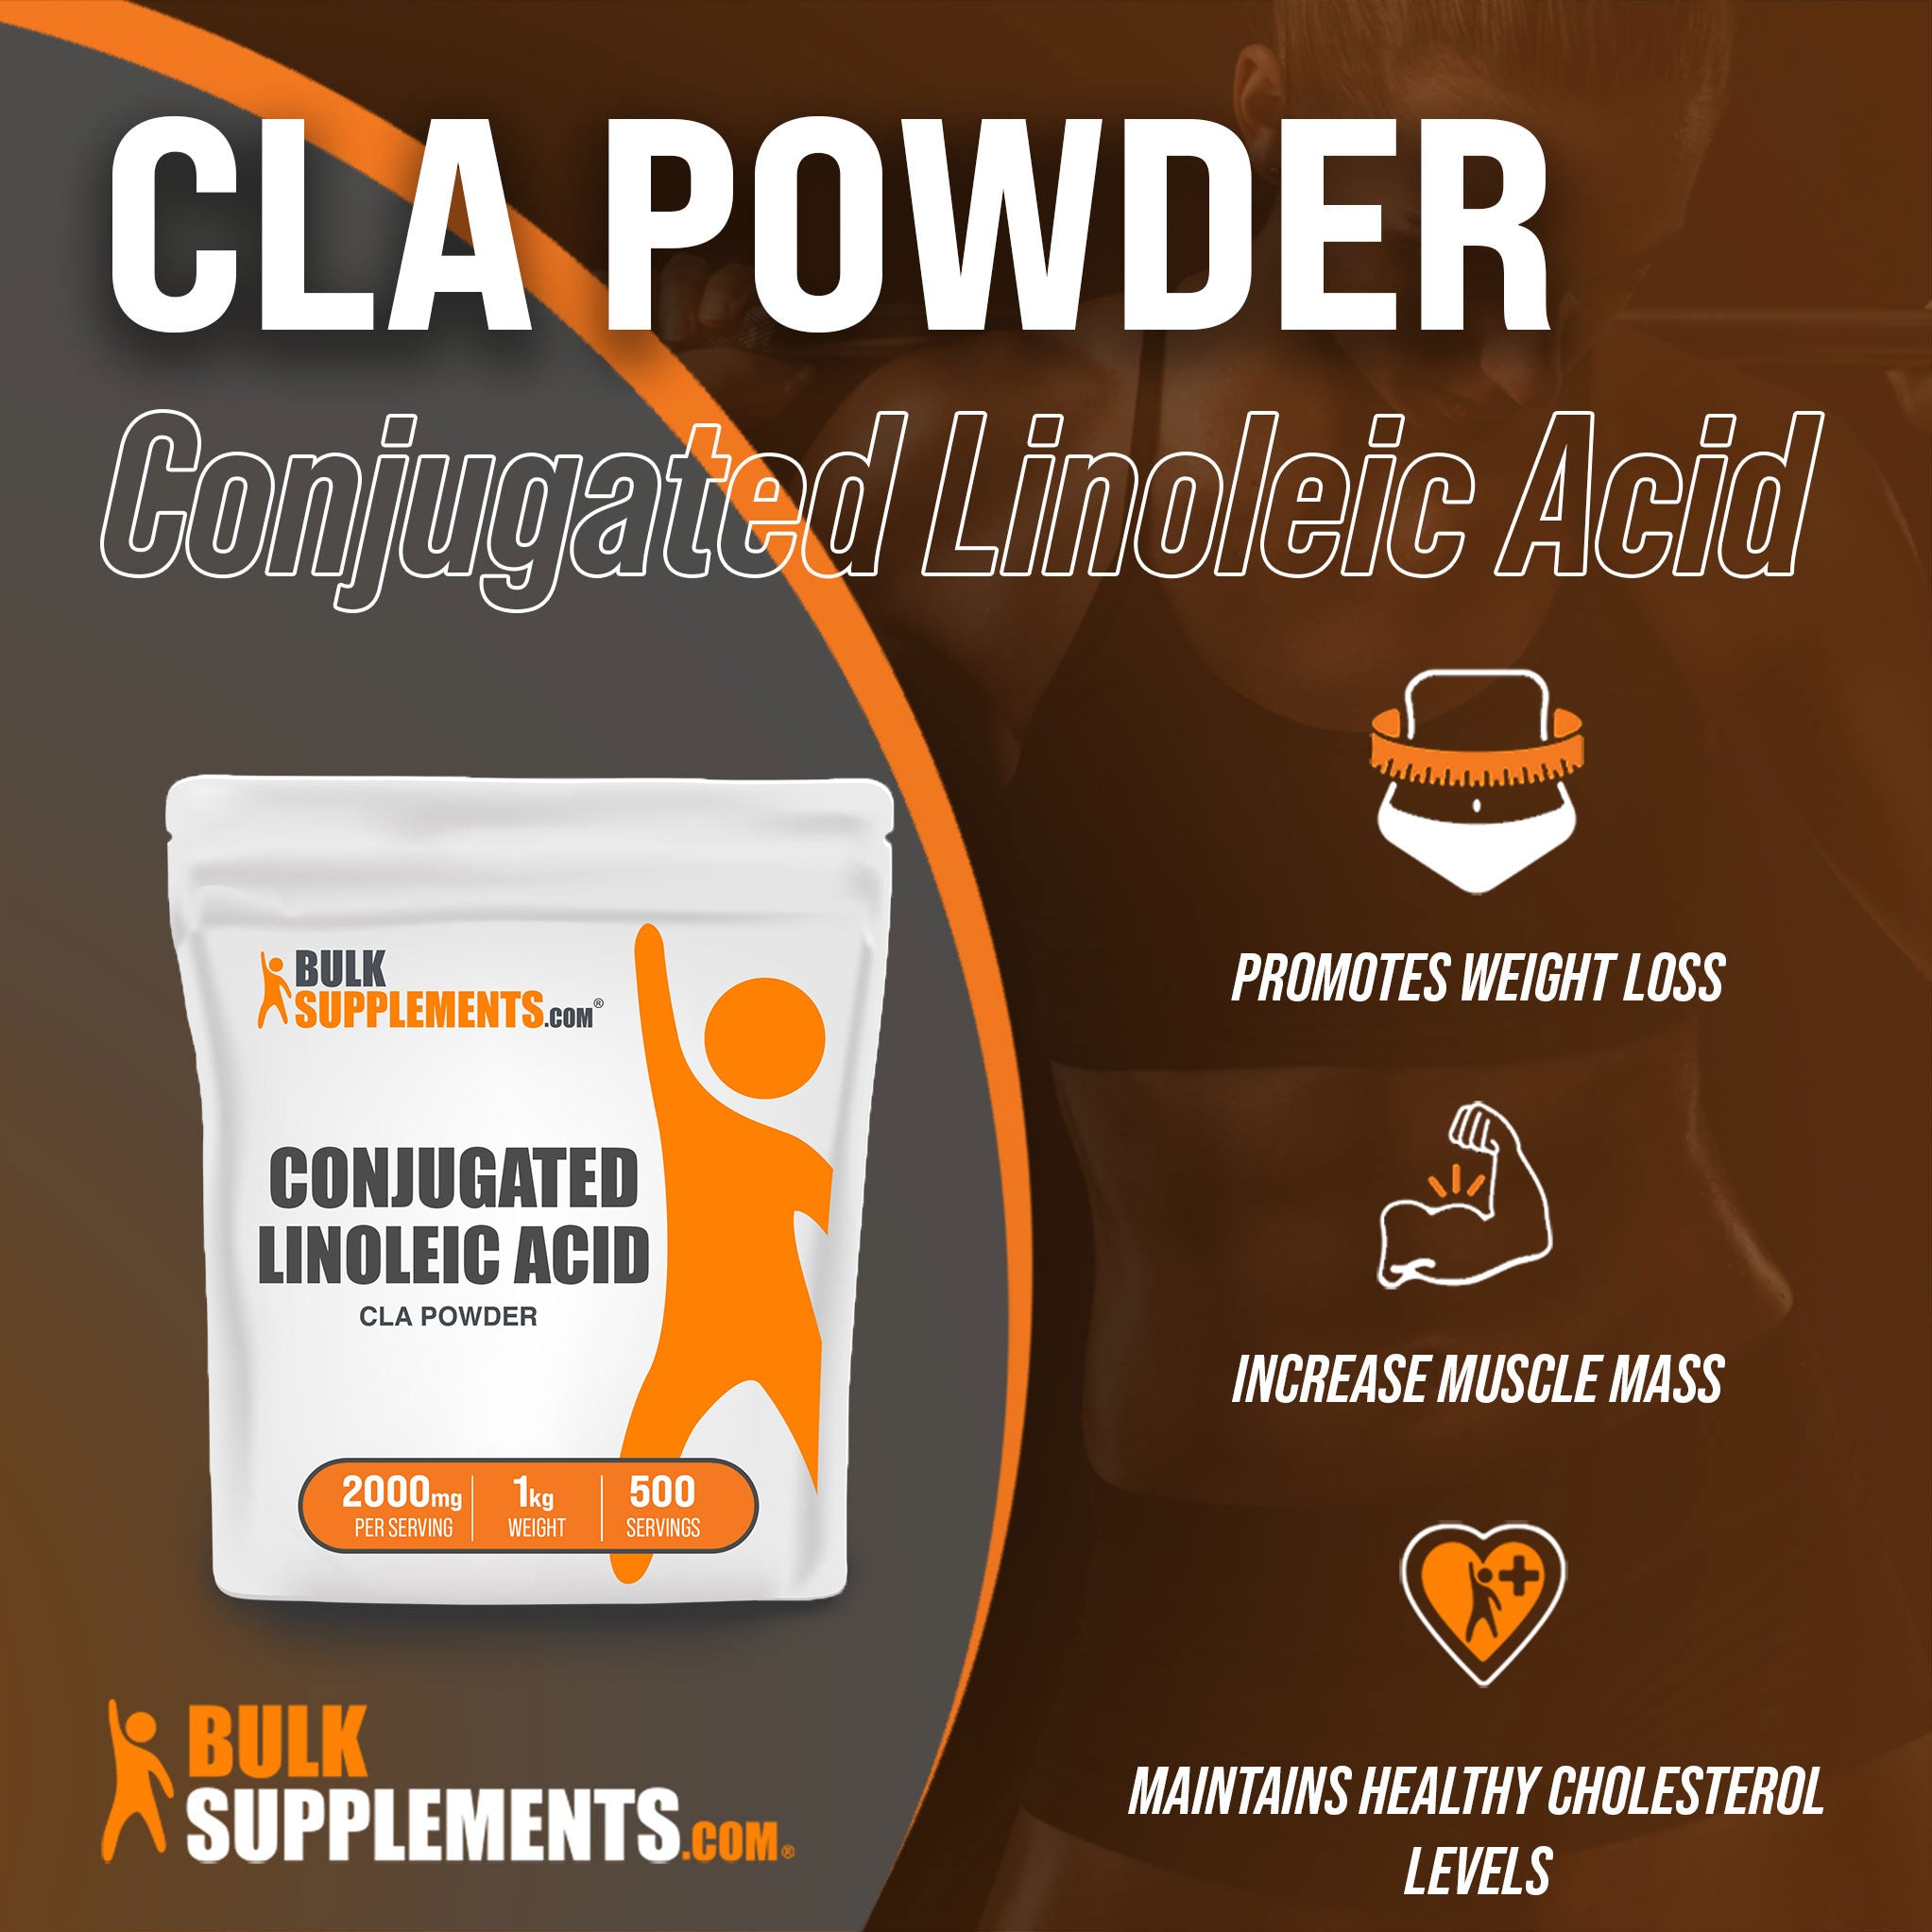 Benefits of CLA Powder; promotes weight loss, increase muscle mass, maintains healthy cholesterol levels